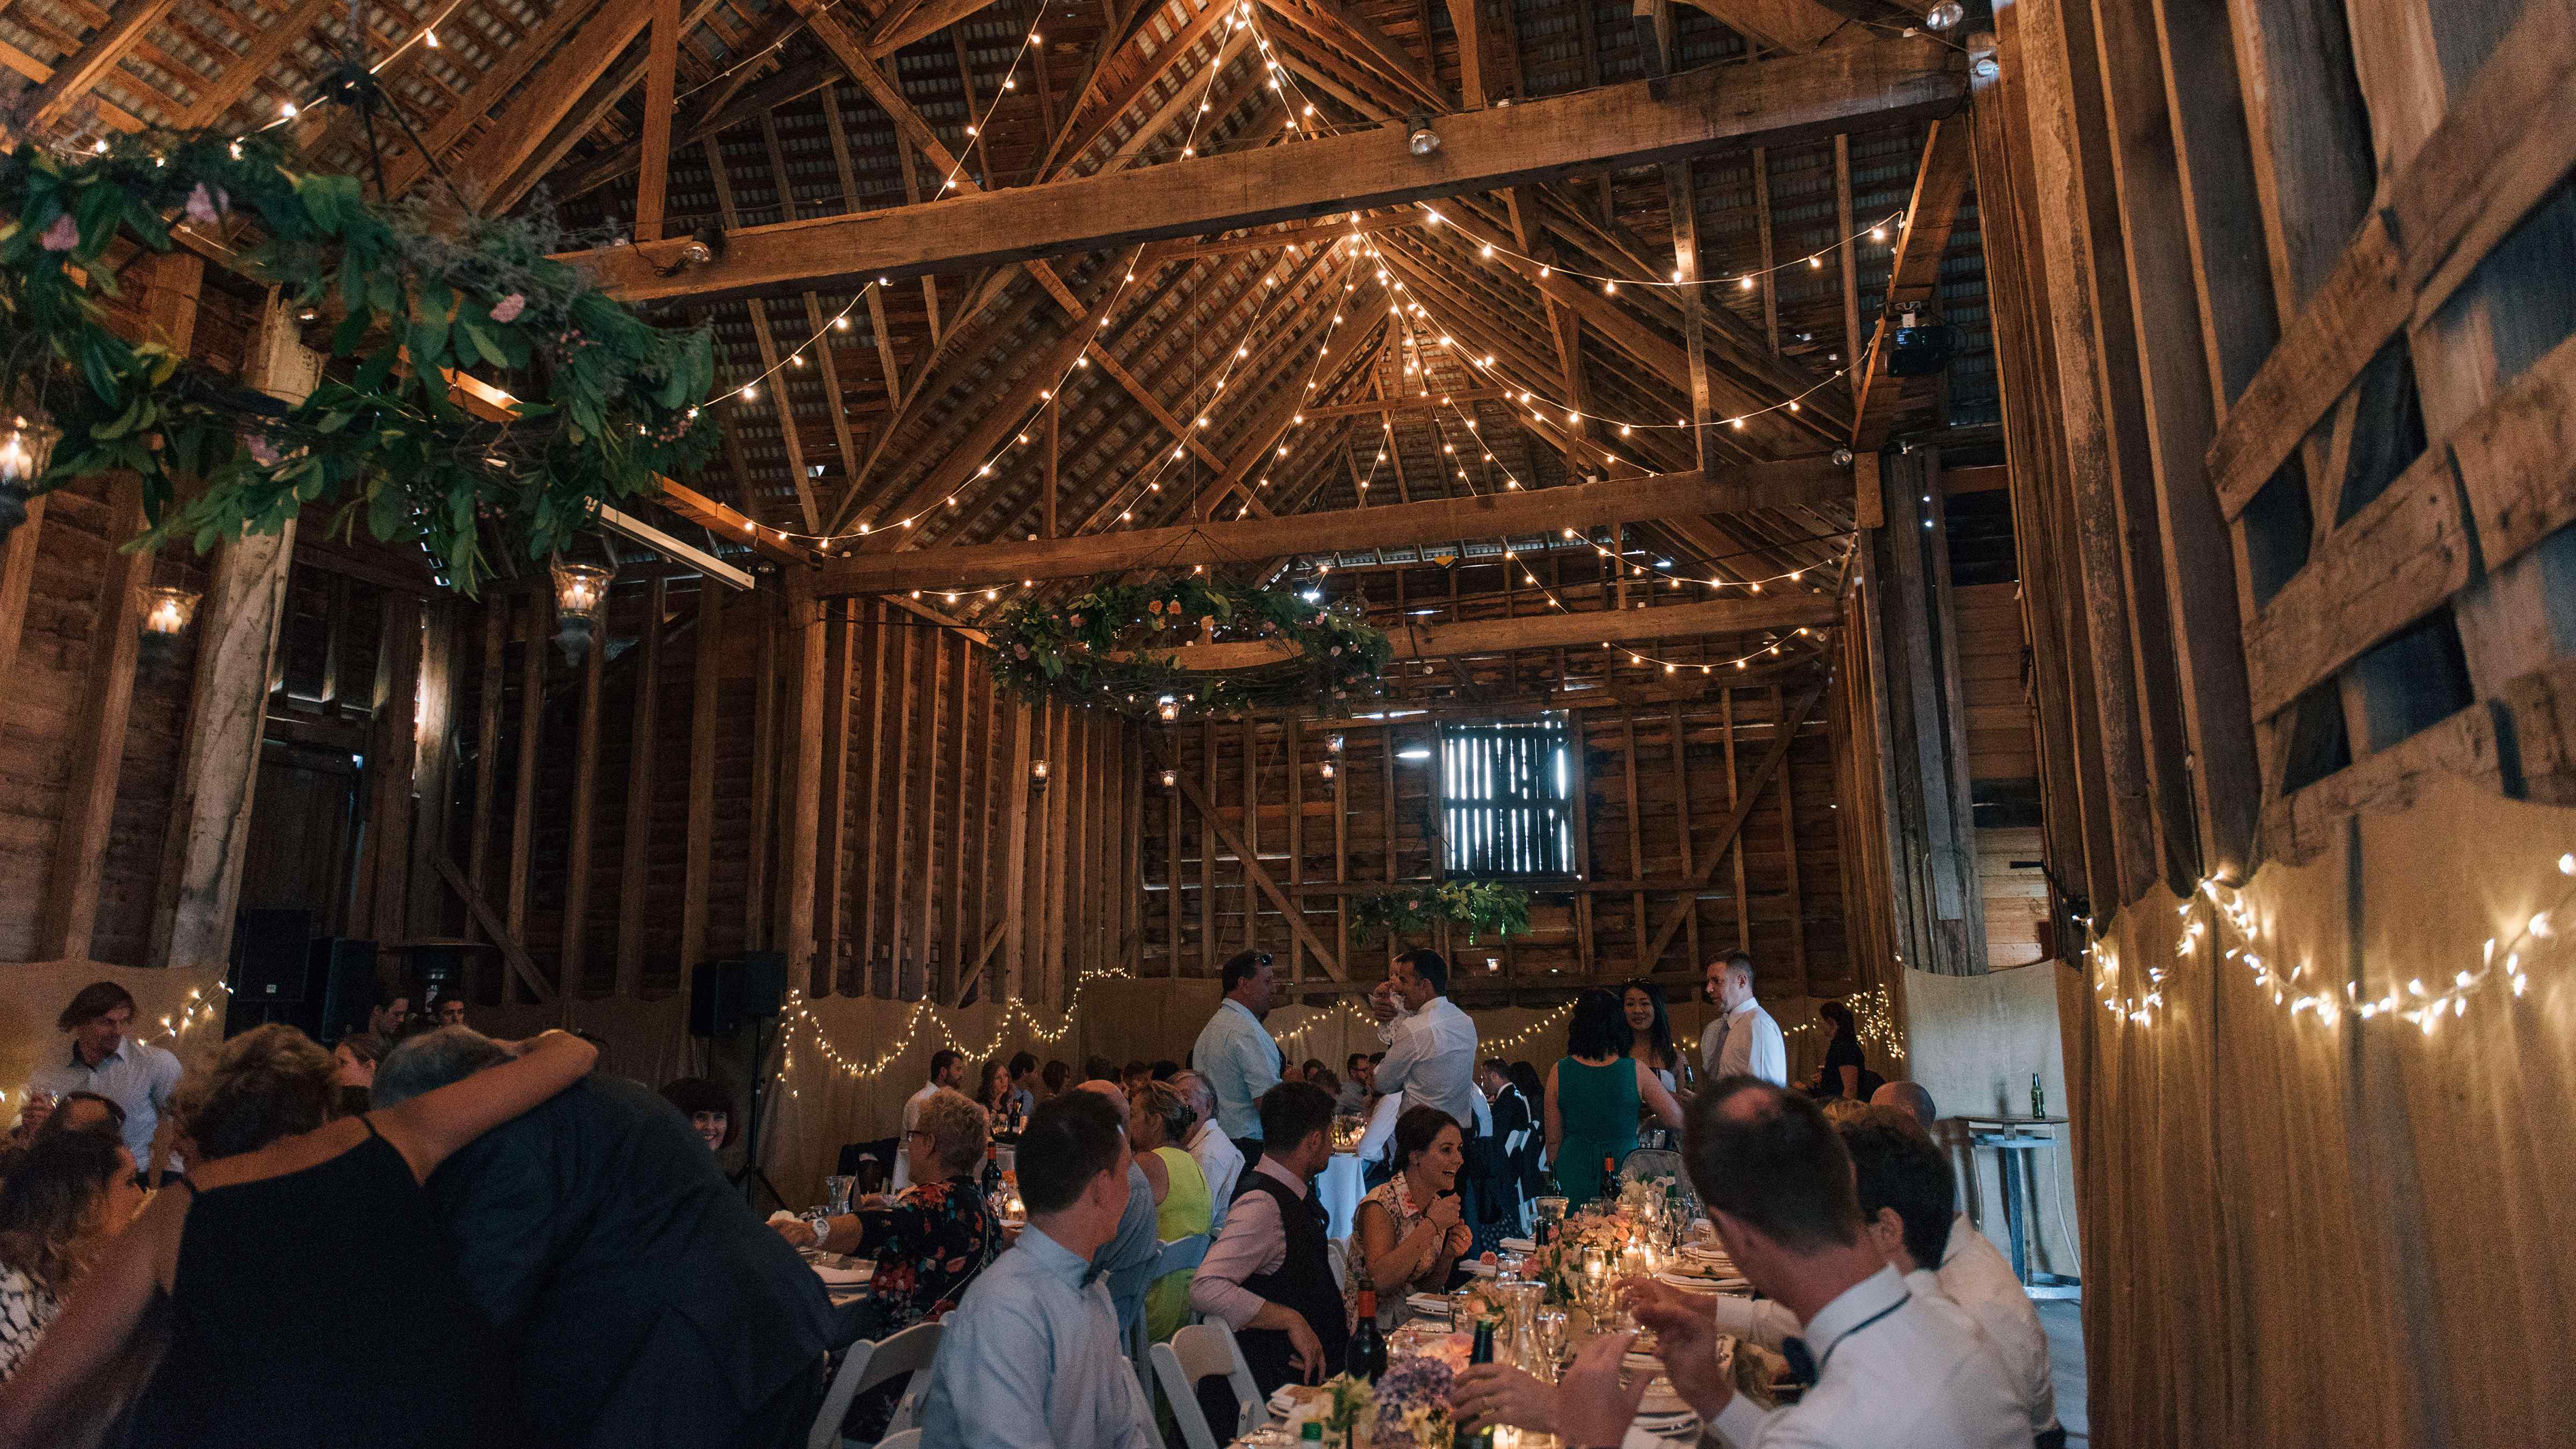 Guests sit at long tables in the Sussex Barn. The ceiling of the barn is draped with festoon lights that show off the grand height of the barn. Three foliage rings hang from the ceiling and more fairy lights are hung around the walls. Photo: Clint & Bethanie Creative.